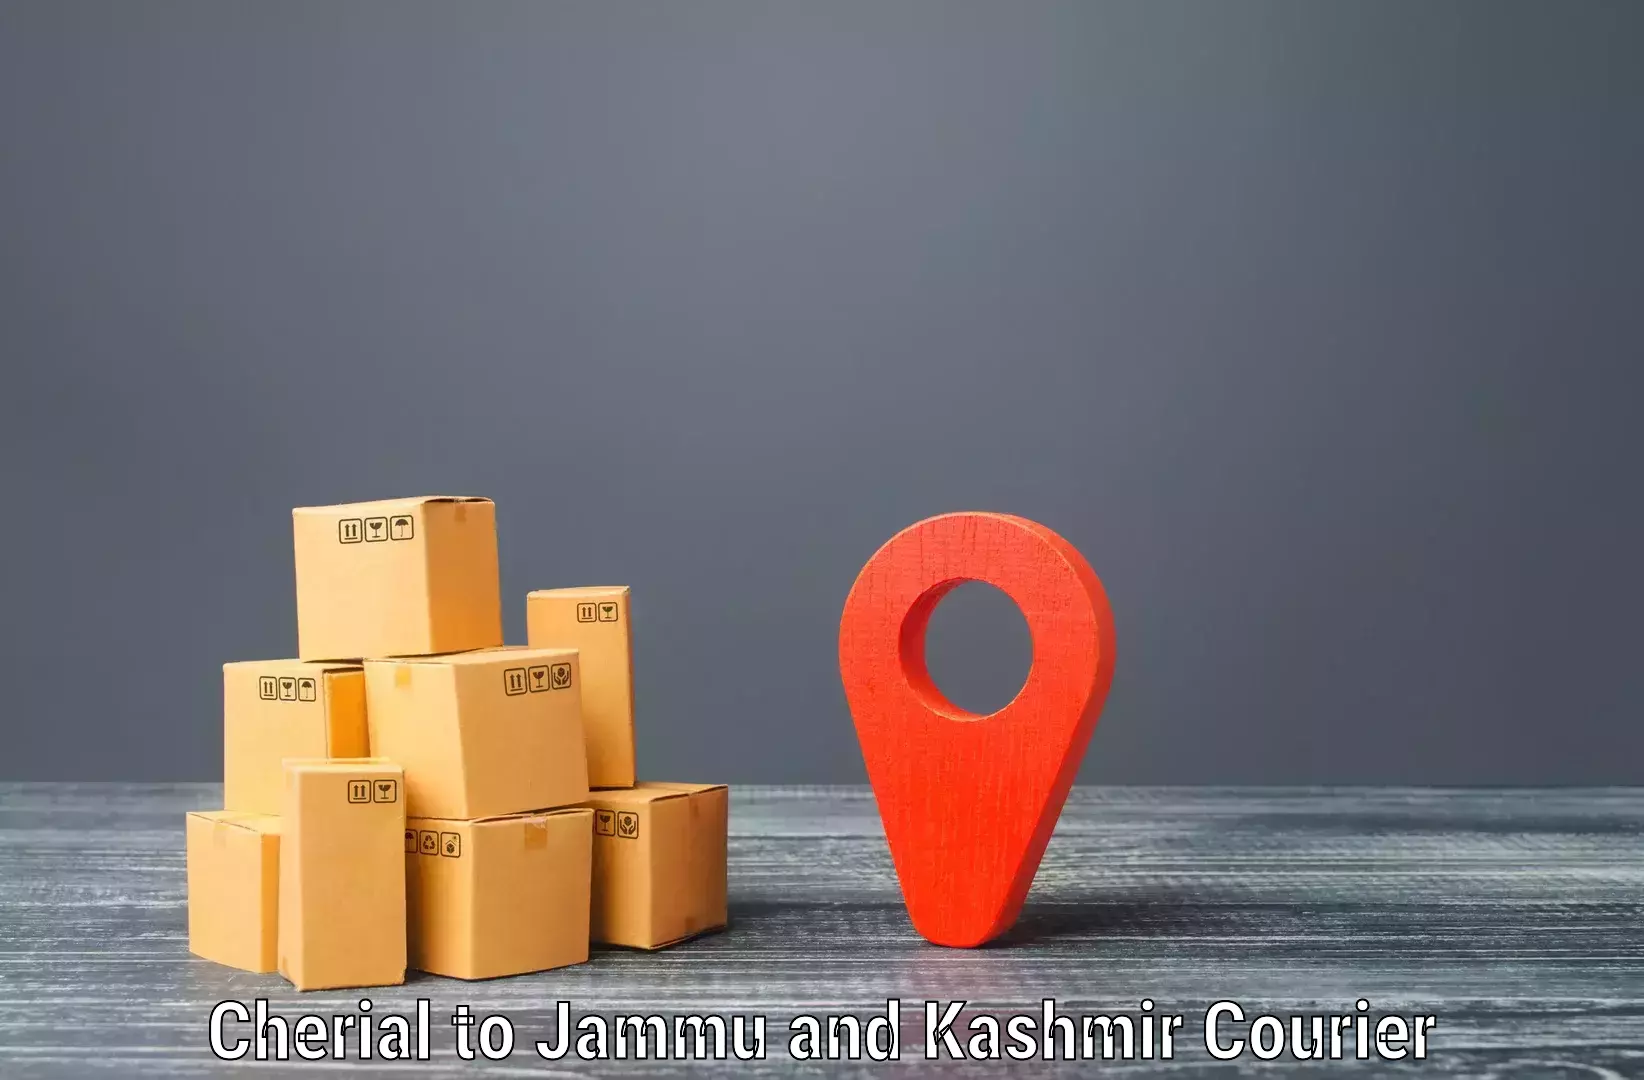 Doorstep delivery service Cherial to Budgam